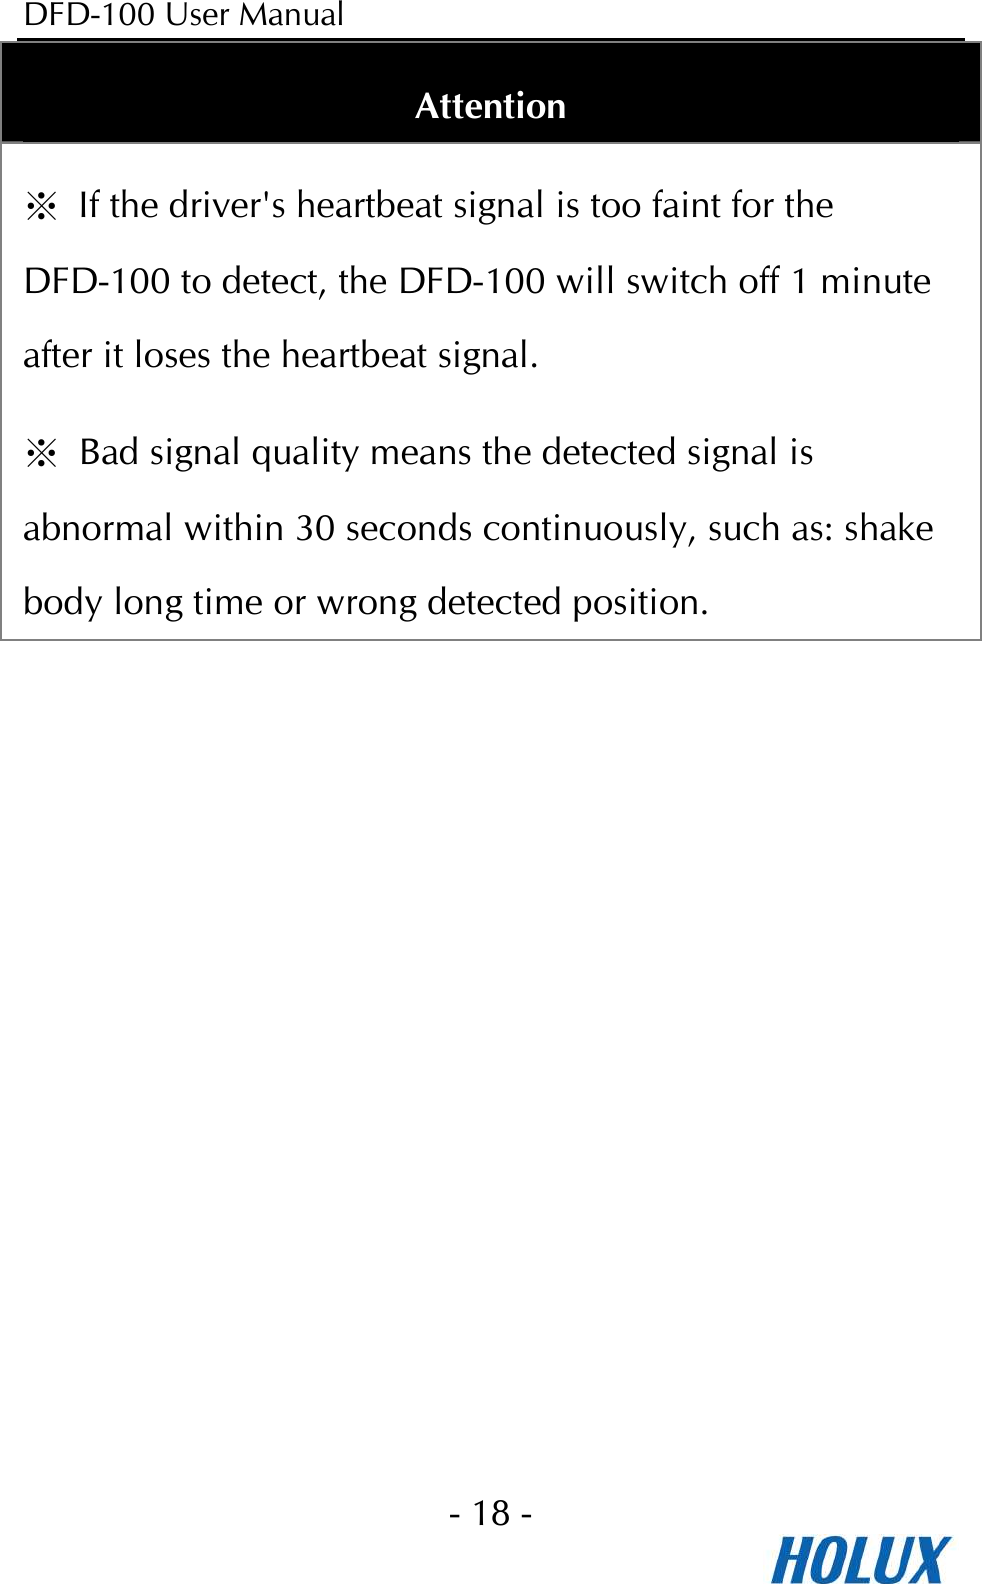 DFD-100 User Manual - 18 -  Attention ※ If the driver&apos;s heartbeat signal is too faint for the DFD-100 to detect, the DFD-100 will switch off 1 minute after it loses the heartbeat signal. ※  Bad signal quality means the detected signal is abnormal within 30 seconds continuously, such as: shake body long time or wrong detected position. 